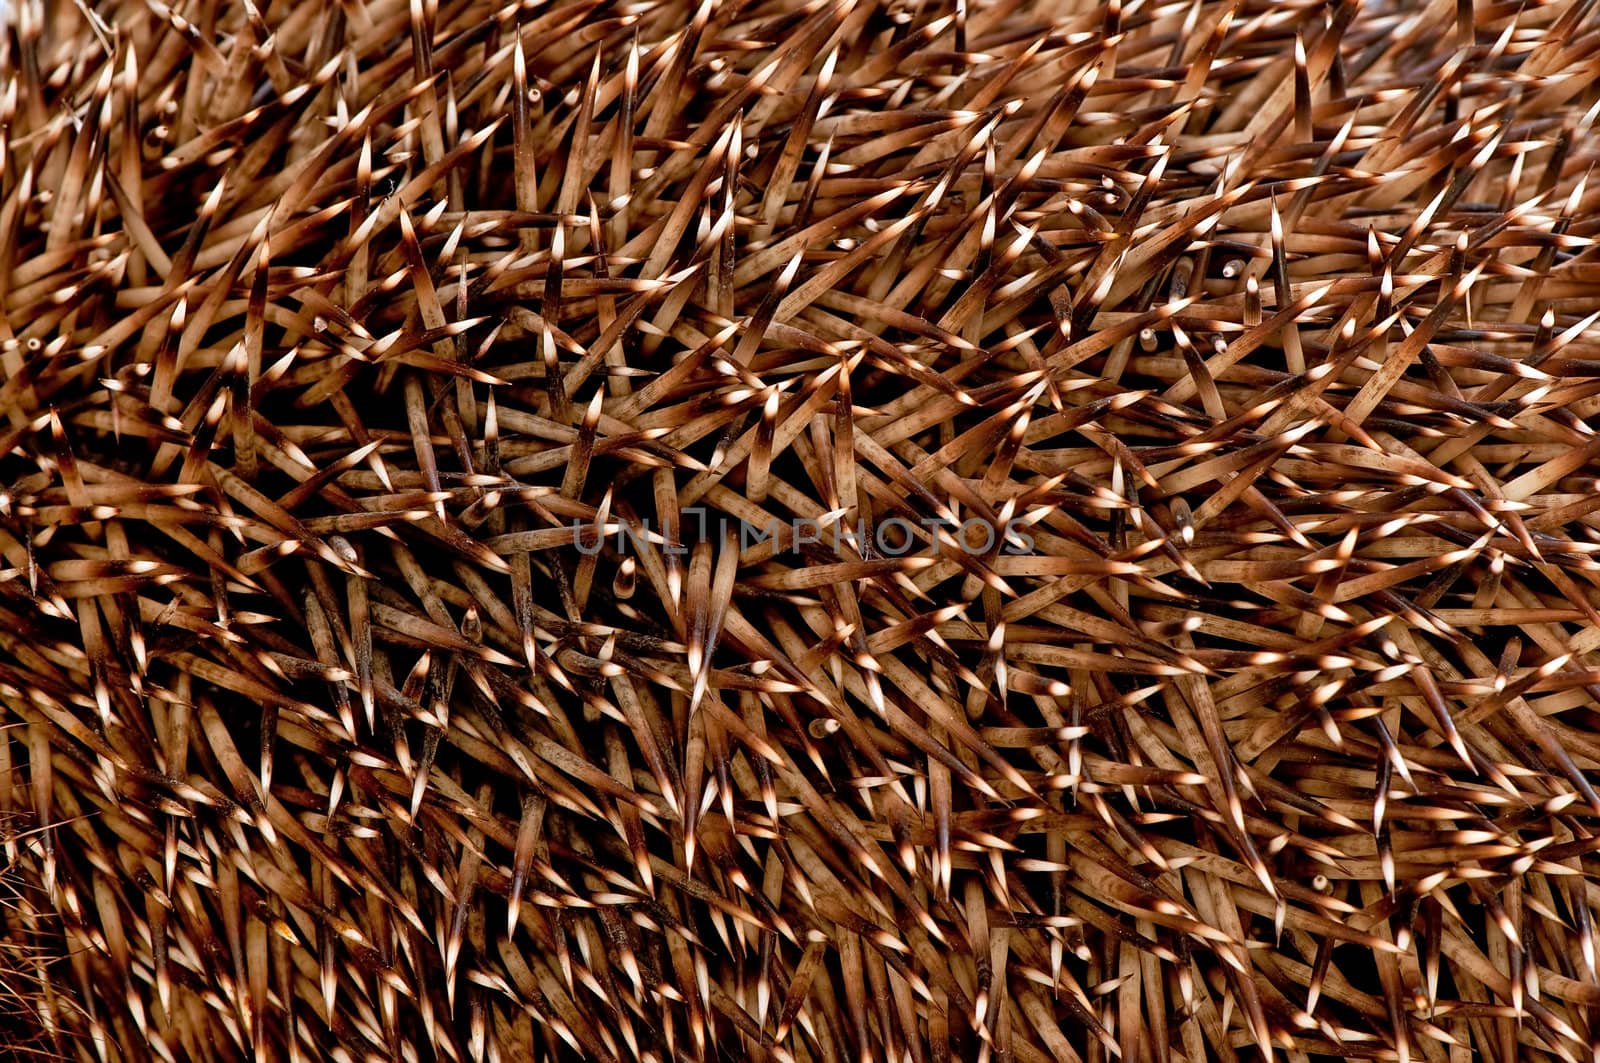 Considerable quantity of prickles of a hedgehog